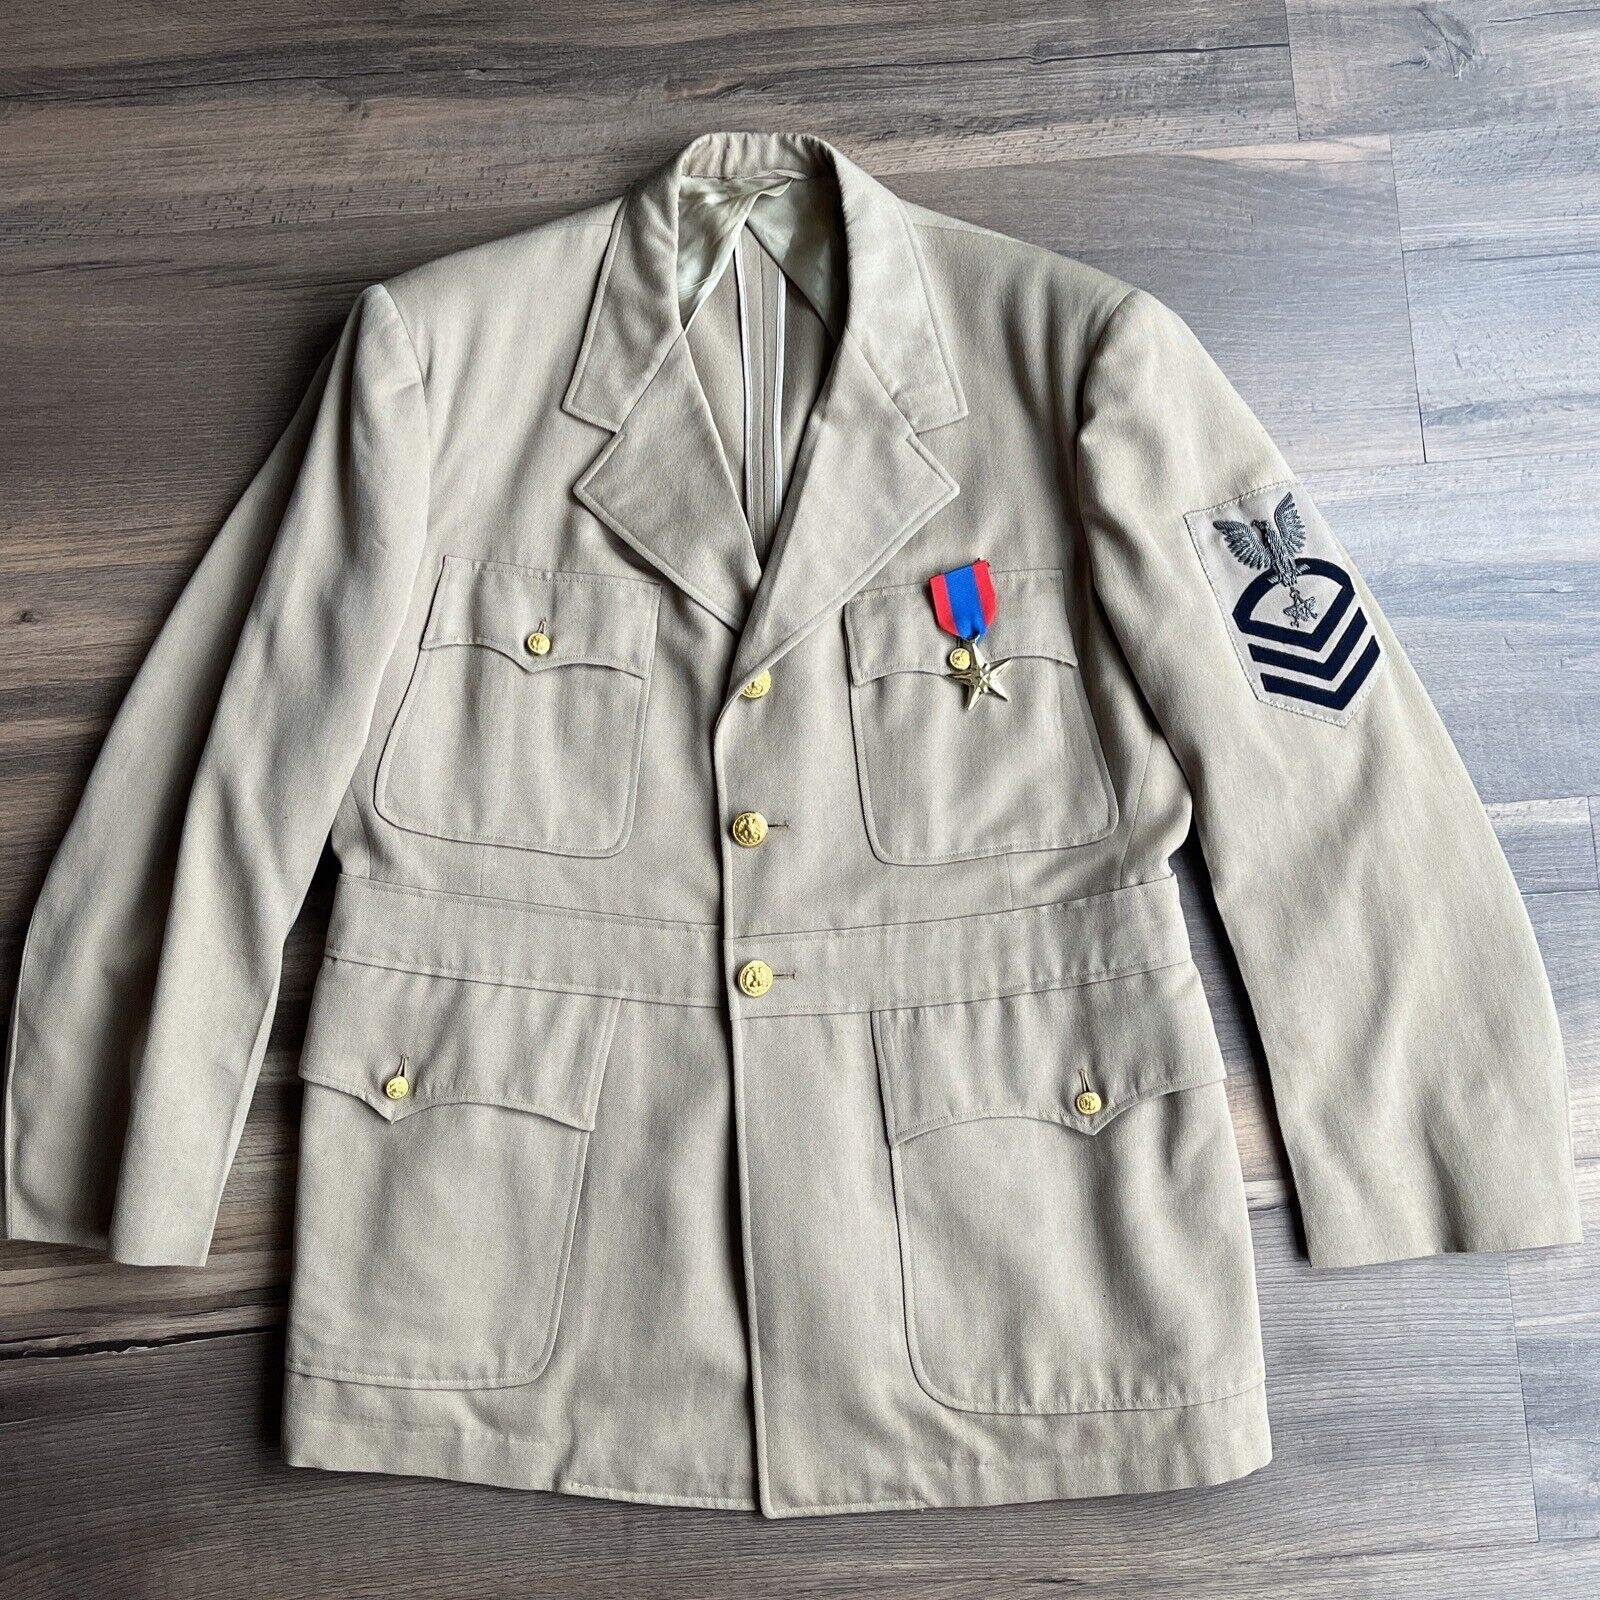 US Navy Chief Petty Officer Uniform Jacket WWII 1950’s Draftsman Insignia